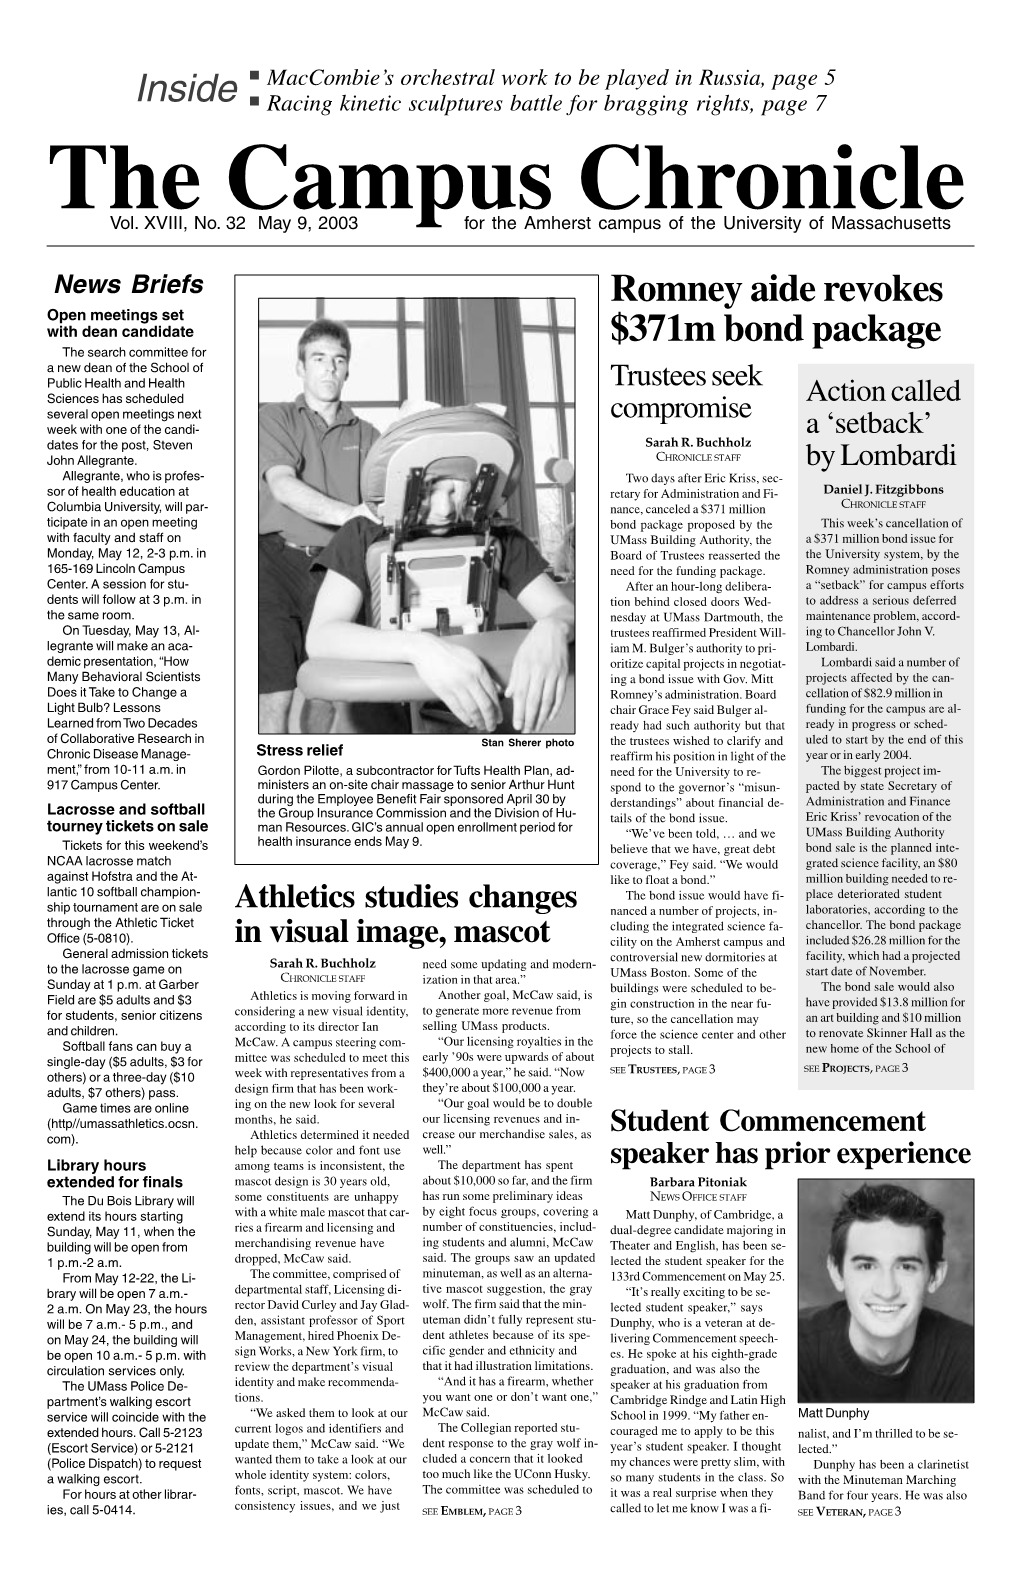 Campus Chronicle May 9, 2003 3 Bulger Given Go-Ahead Senior Ready to Try to Save Bond Issue to Address